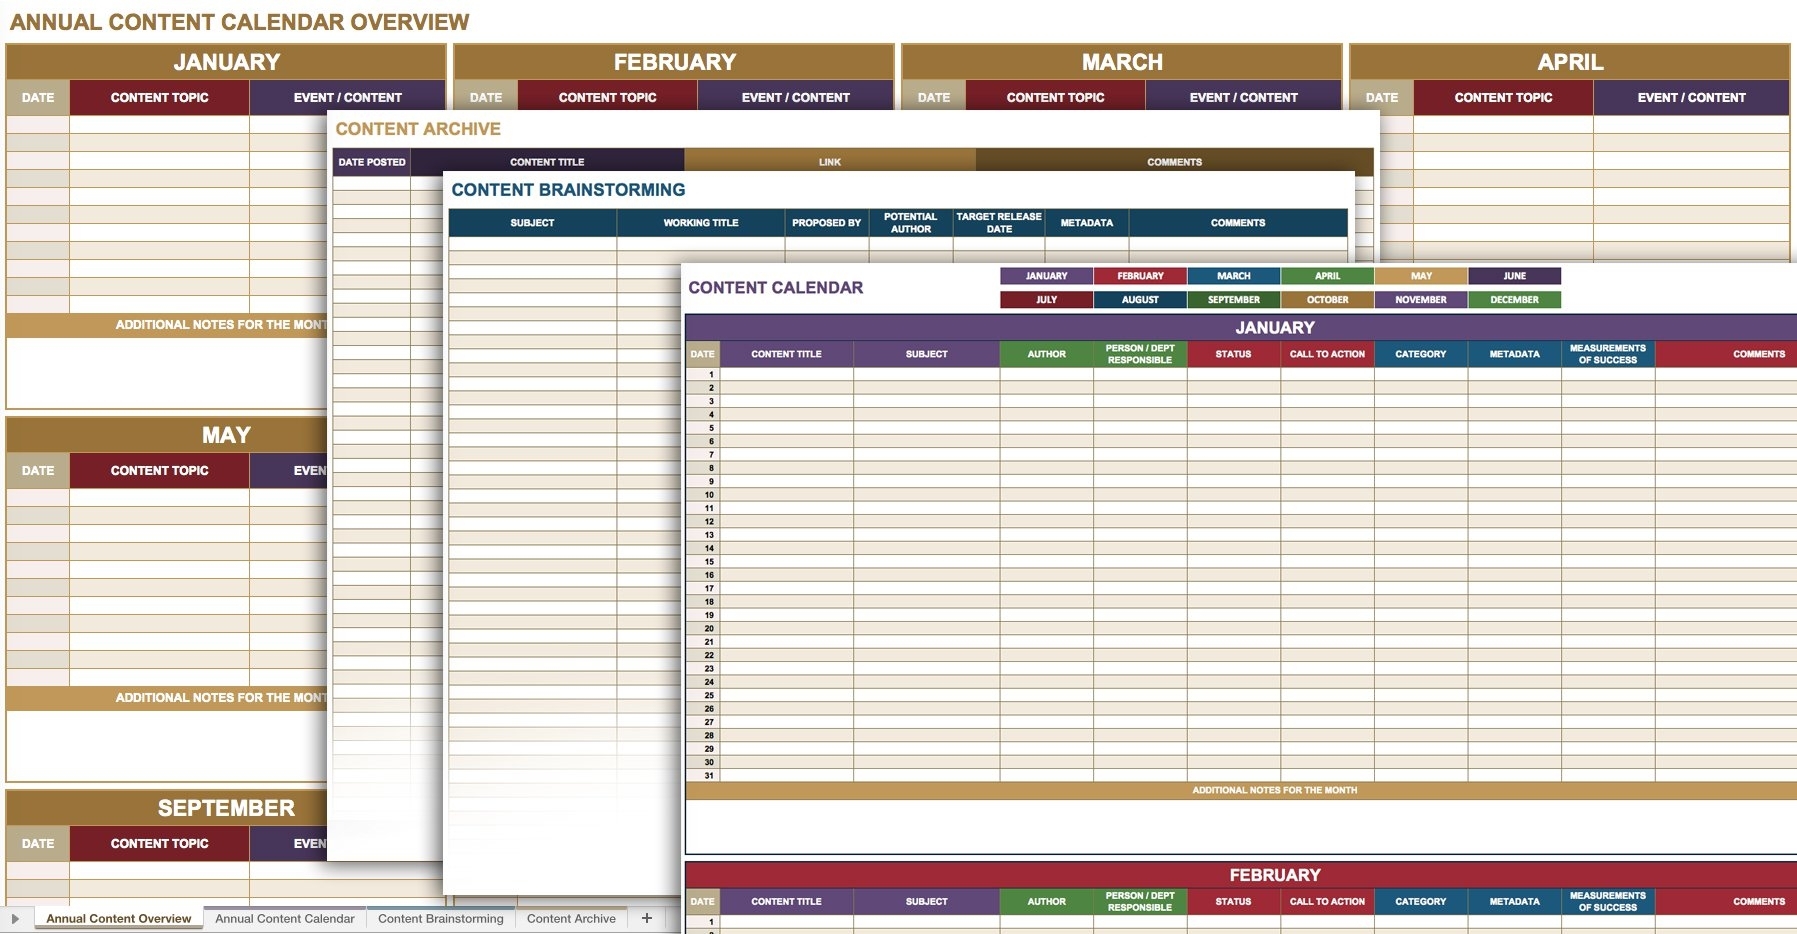 12 Free Social Media Templates | Smartsheet within Social Content Calendar Template Monthly